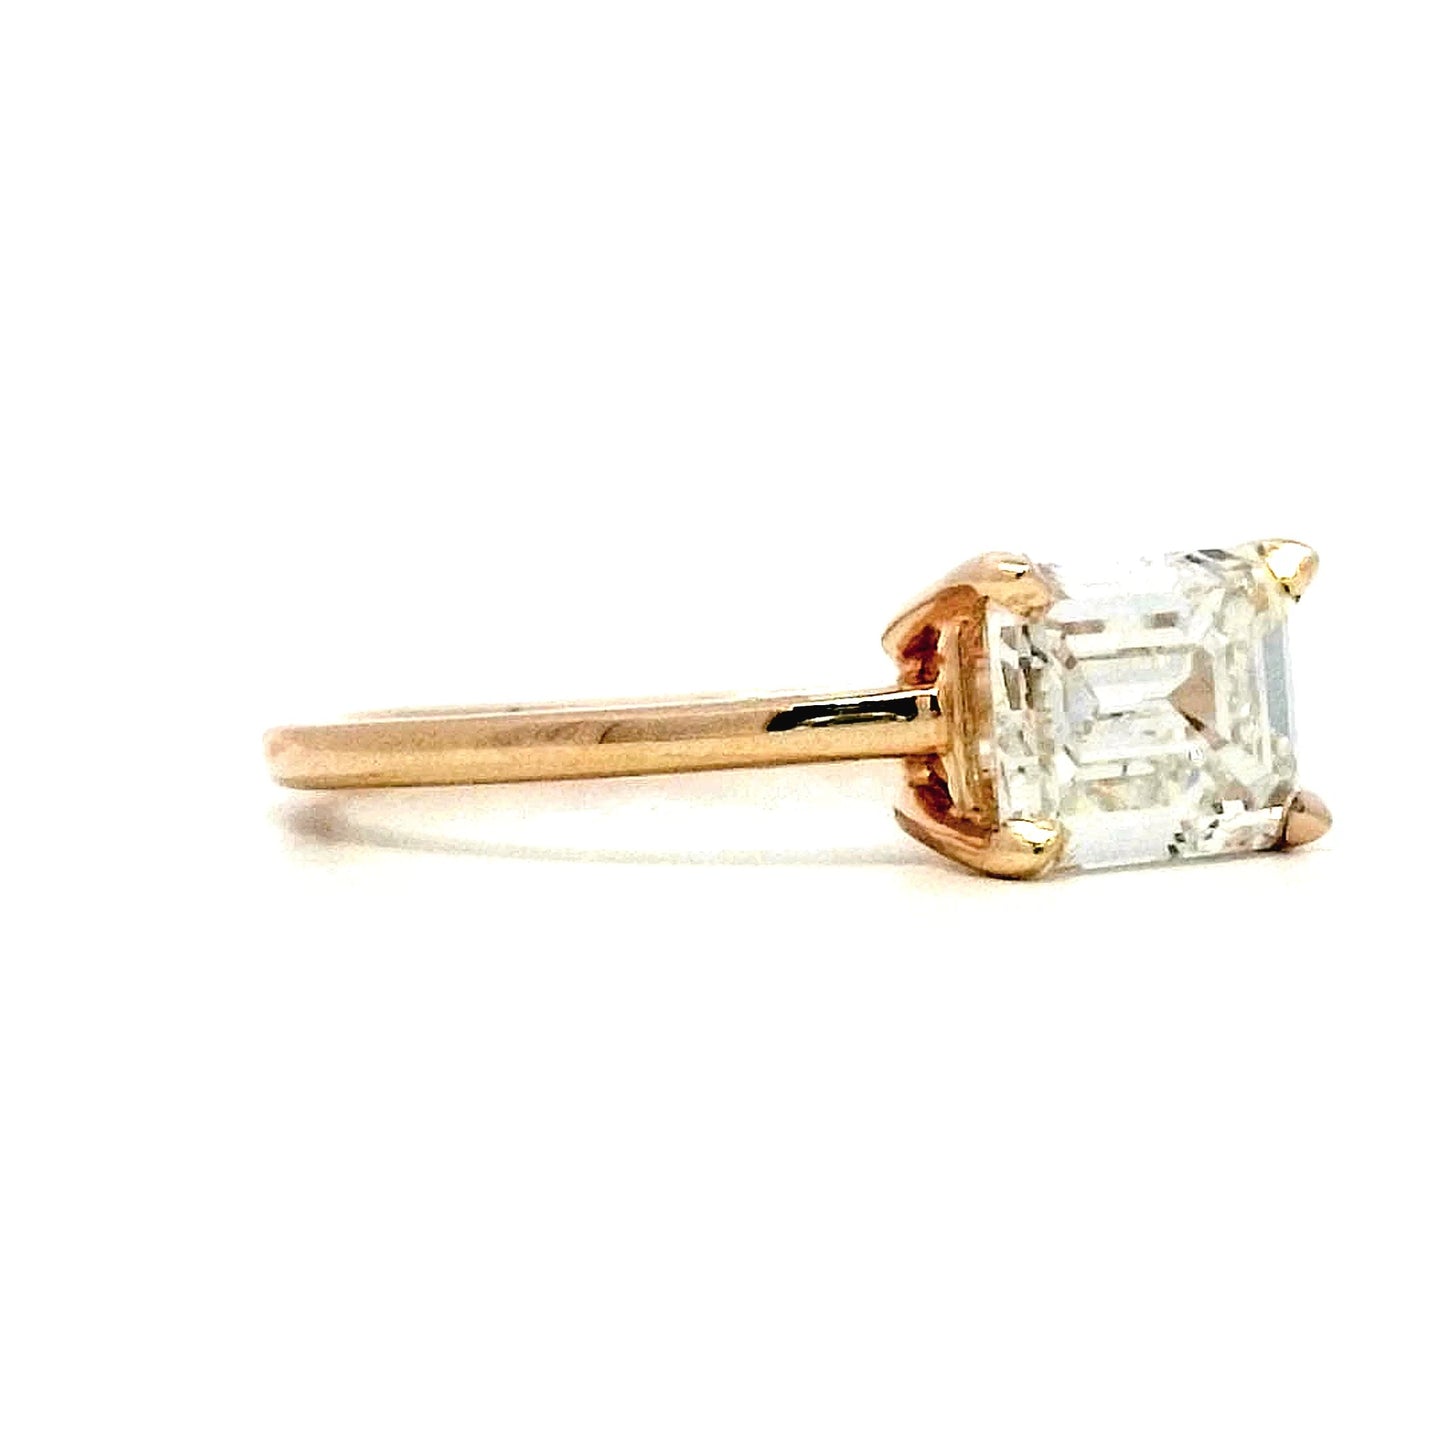 1.57 Emerald Cut Solitaire Engagement Ring in 14k Yellow Gold